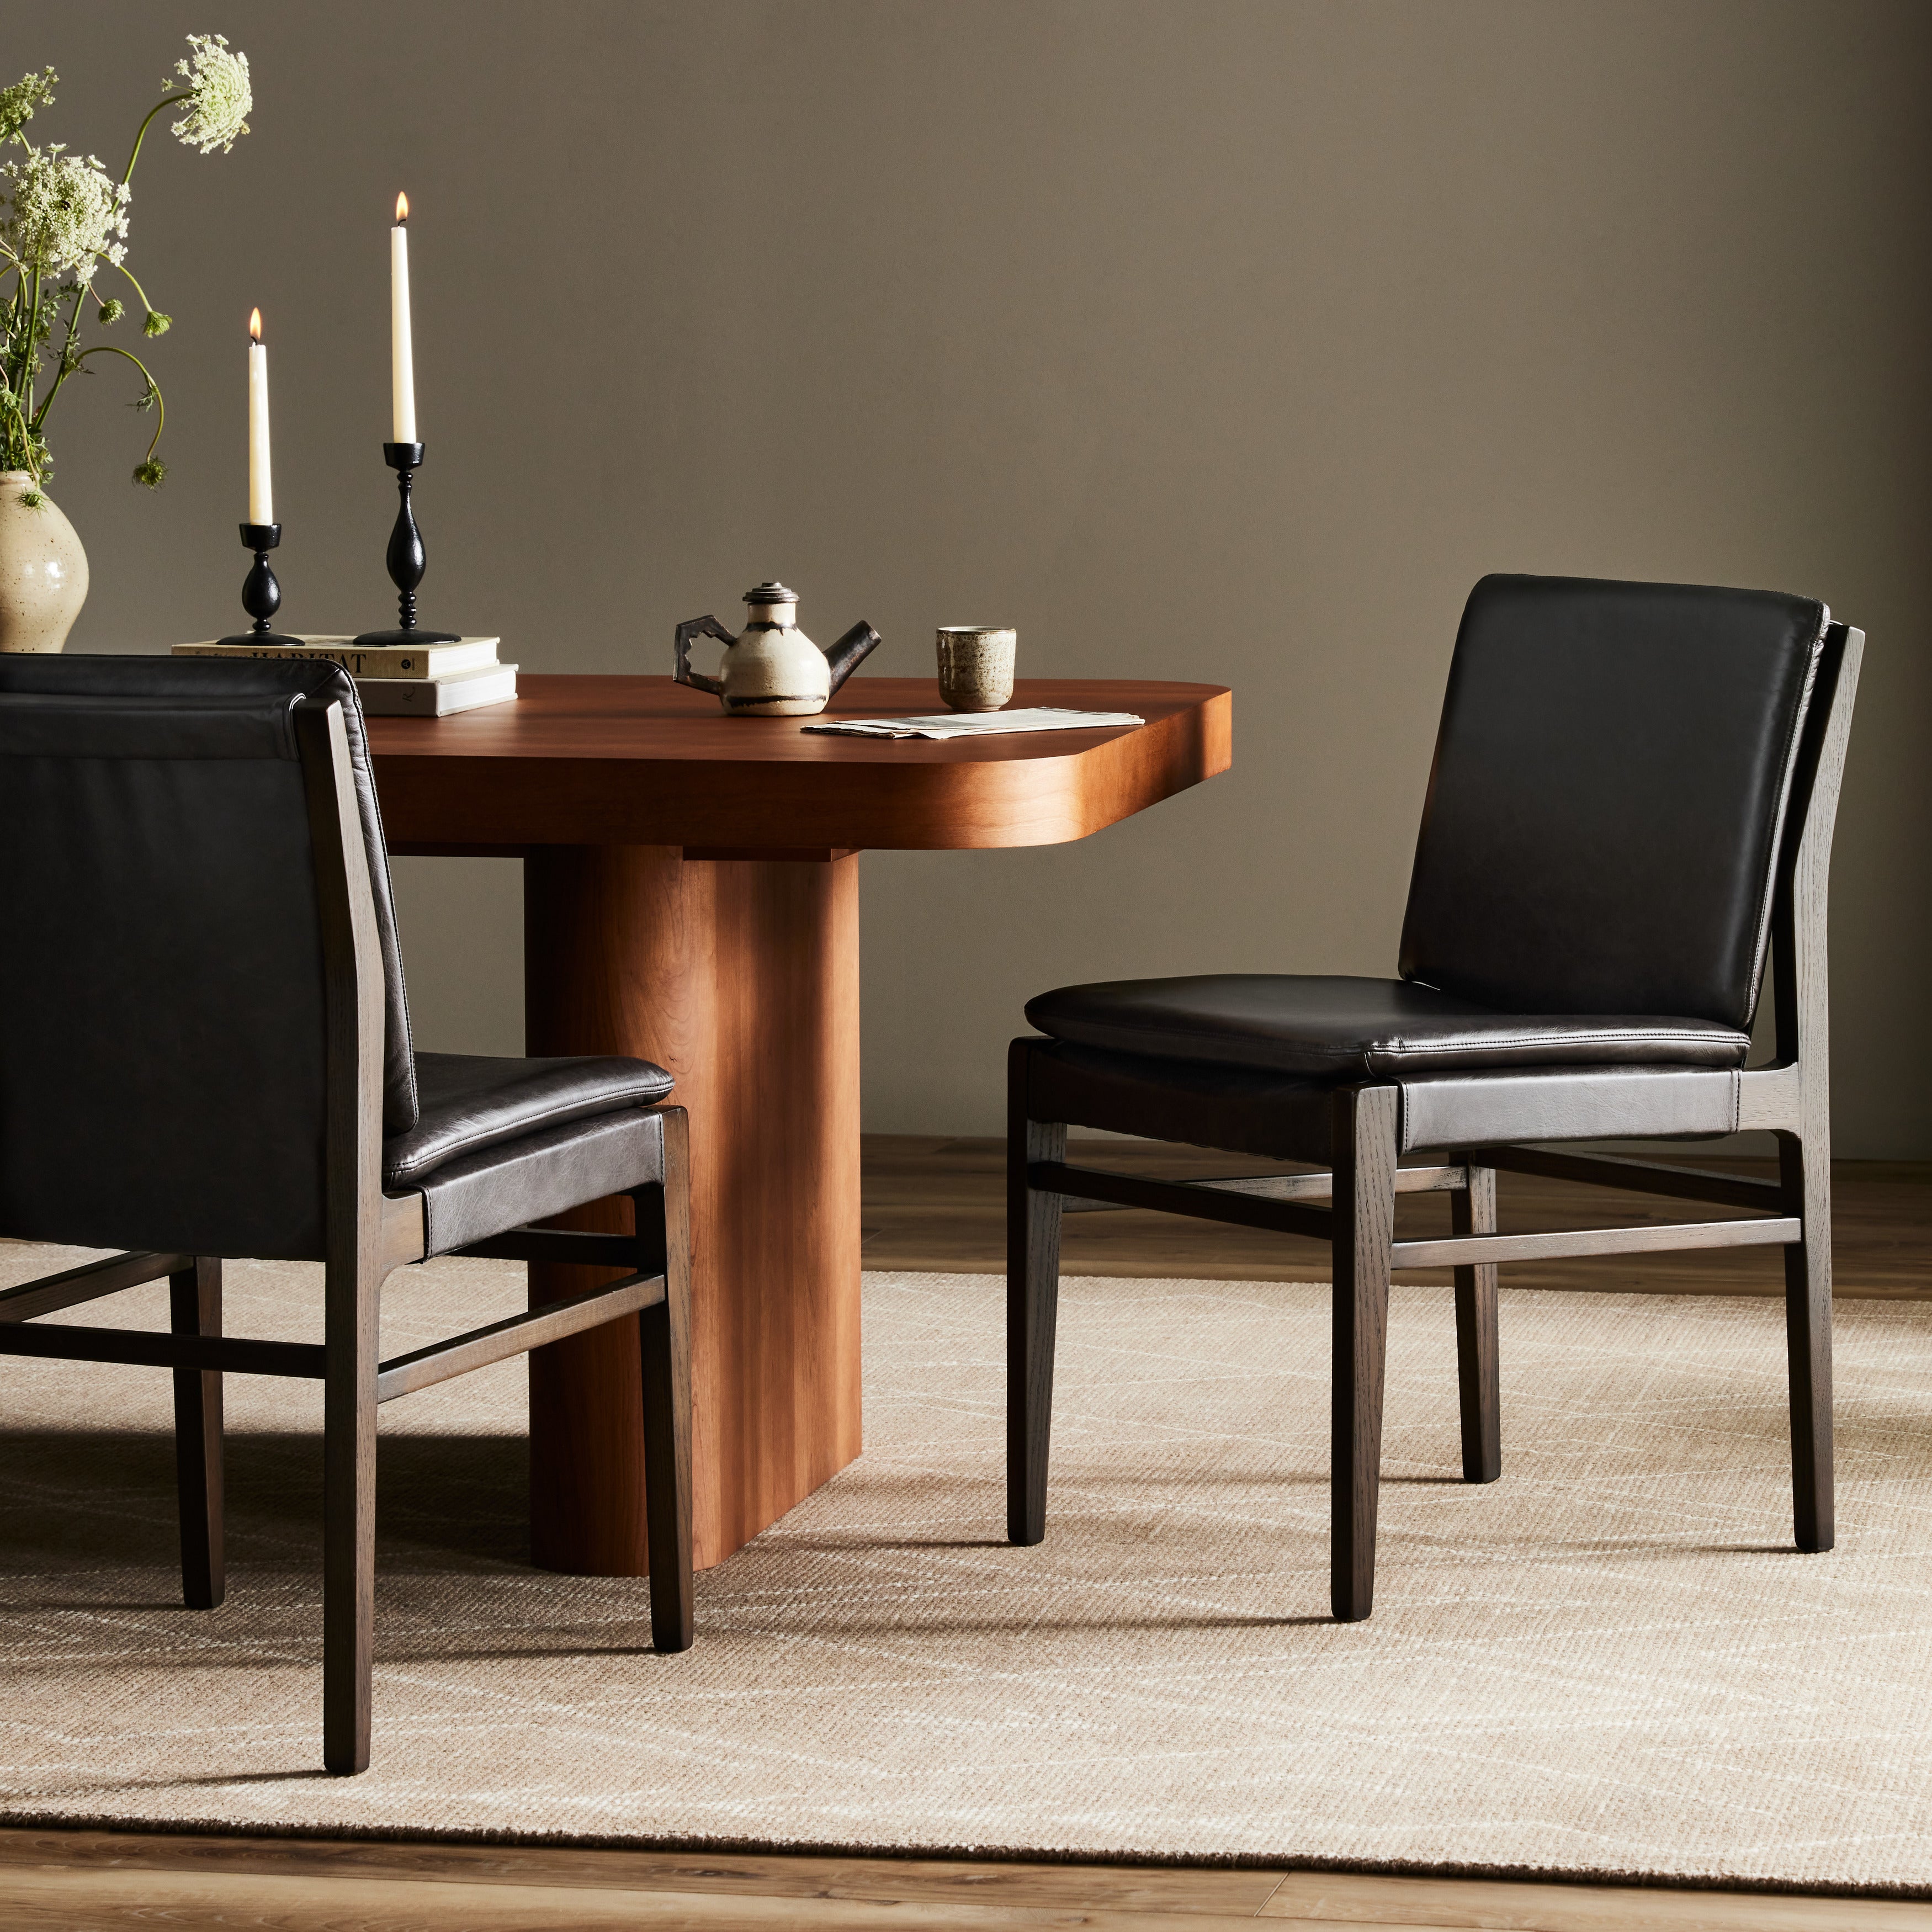 Modern and transitional, burnt oak nettlewood frames this armless dining chair. Finished with a top-grain leather exclusive to Four Hands. Amethyst Home provides interior design, new construction, custom furniture, and area rugs in the Alpharetta metro area.